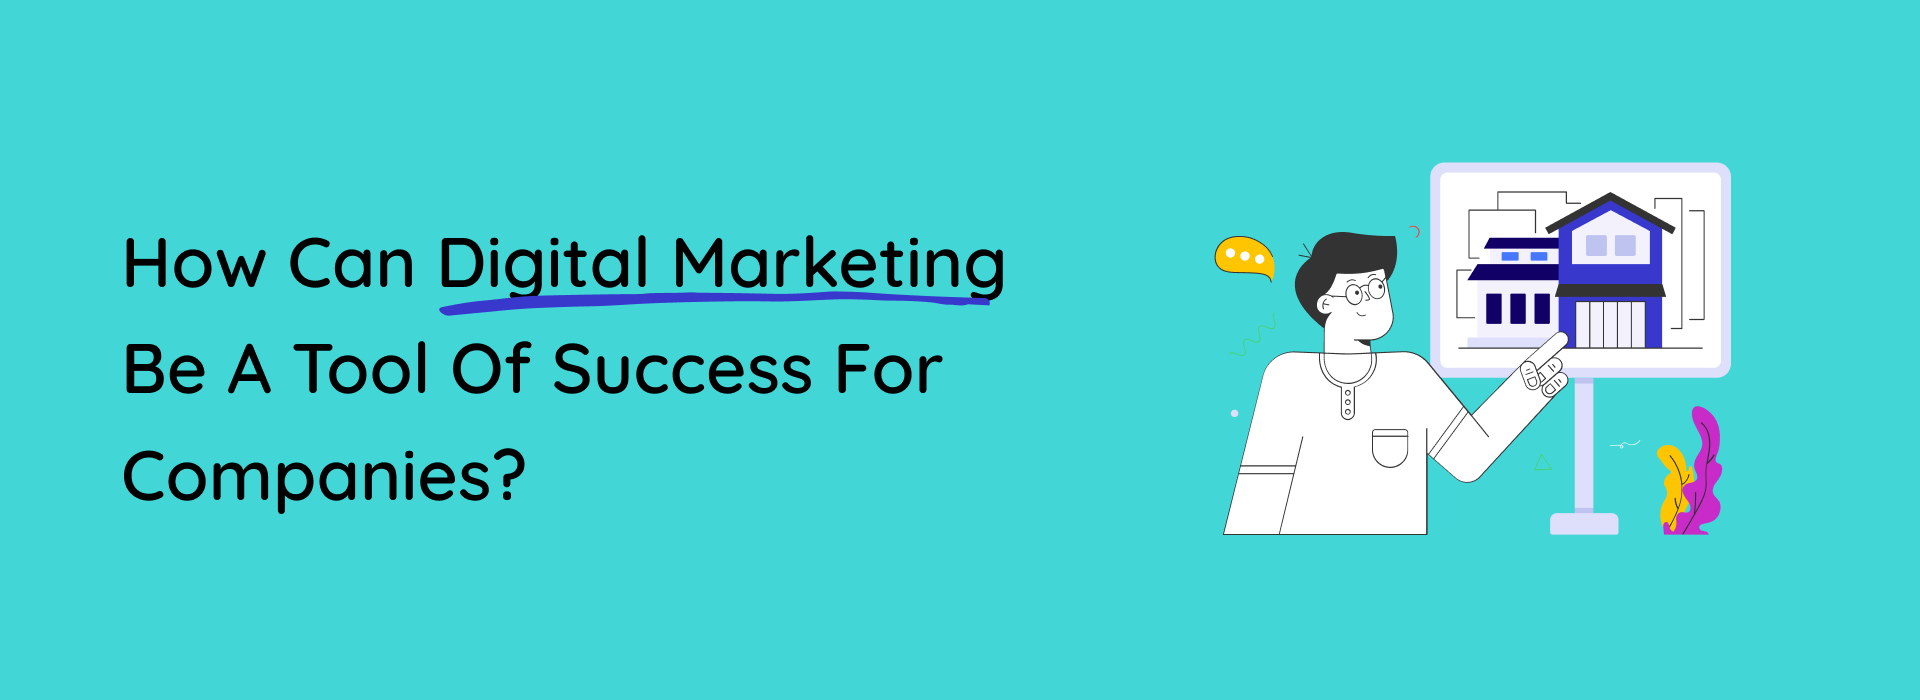 FI - How Can Digital Marketing Be a Tool of Success for Companies